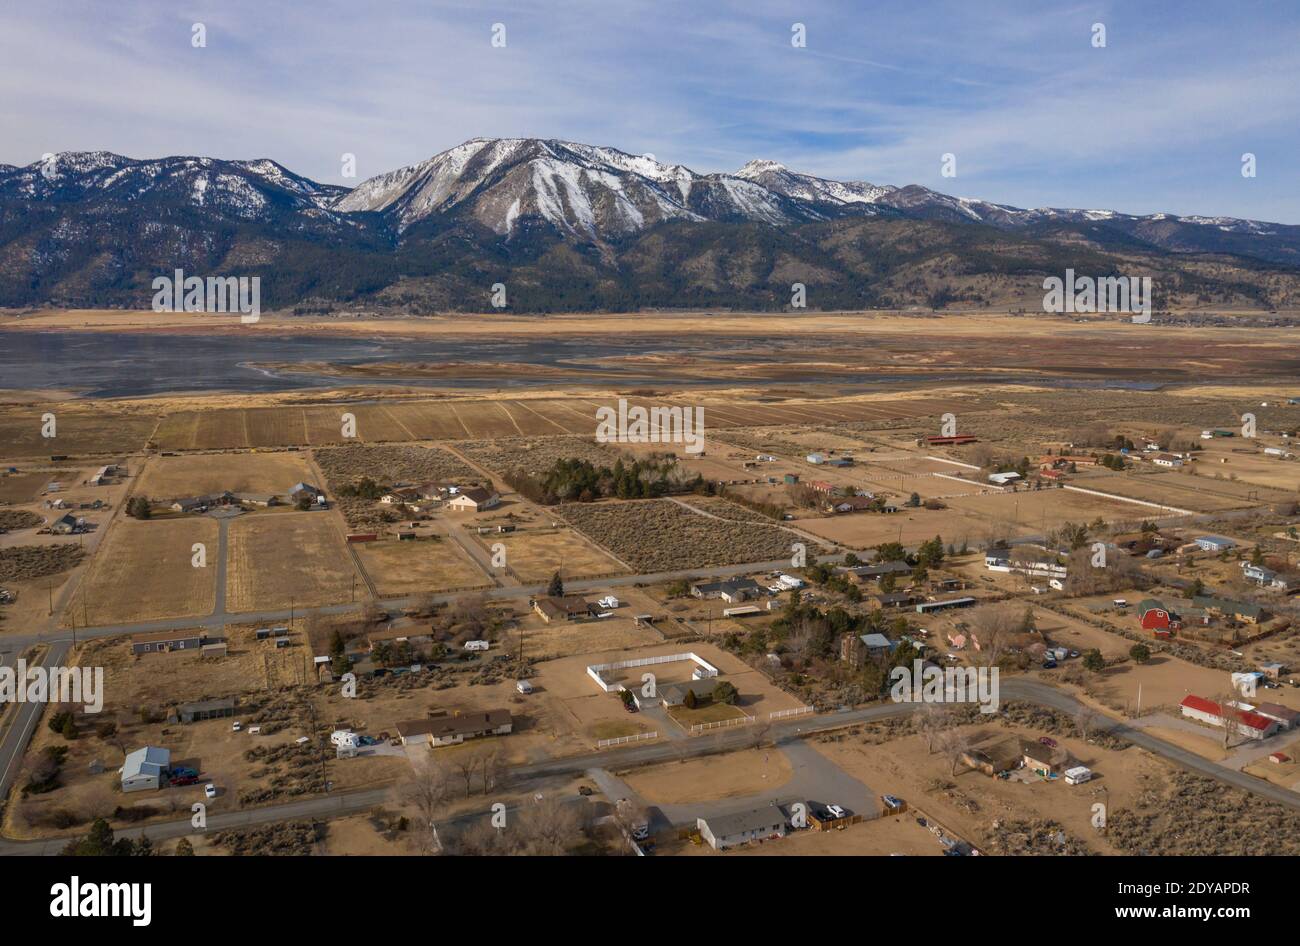 NEW WASHOE CITY, NEVADA, UNITED STATES - Dec 24, 2020: Homes in the community of New Washoe City spread out beneath Slide Mountain and Mt Rose in the Stock Photo